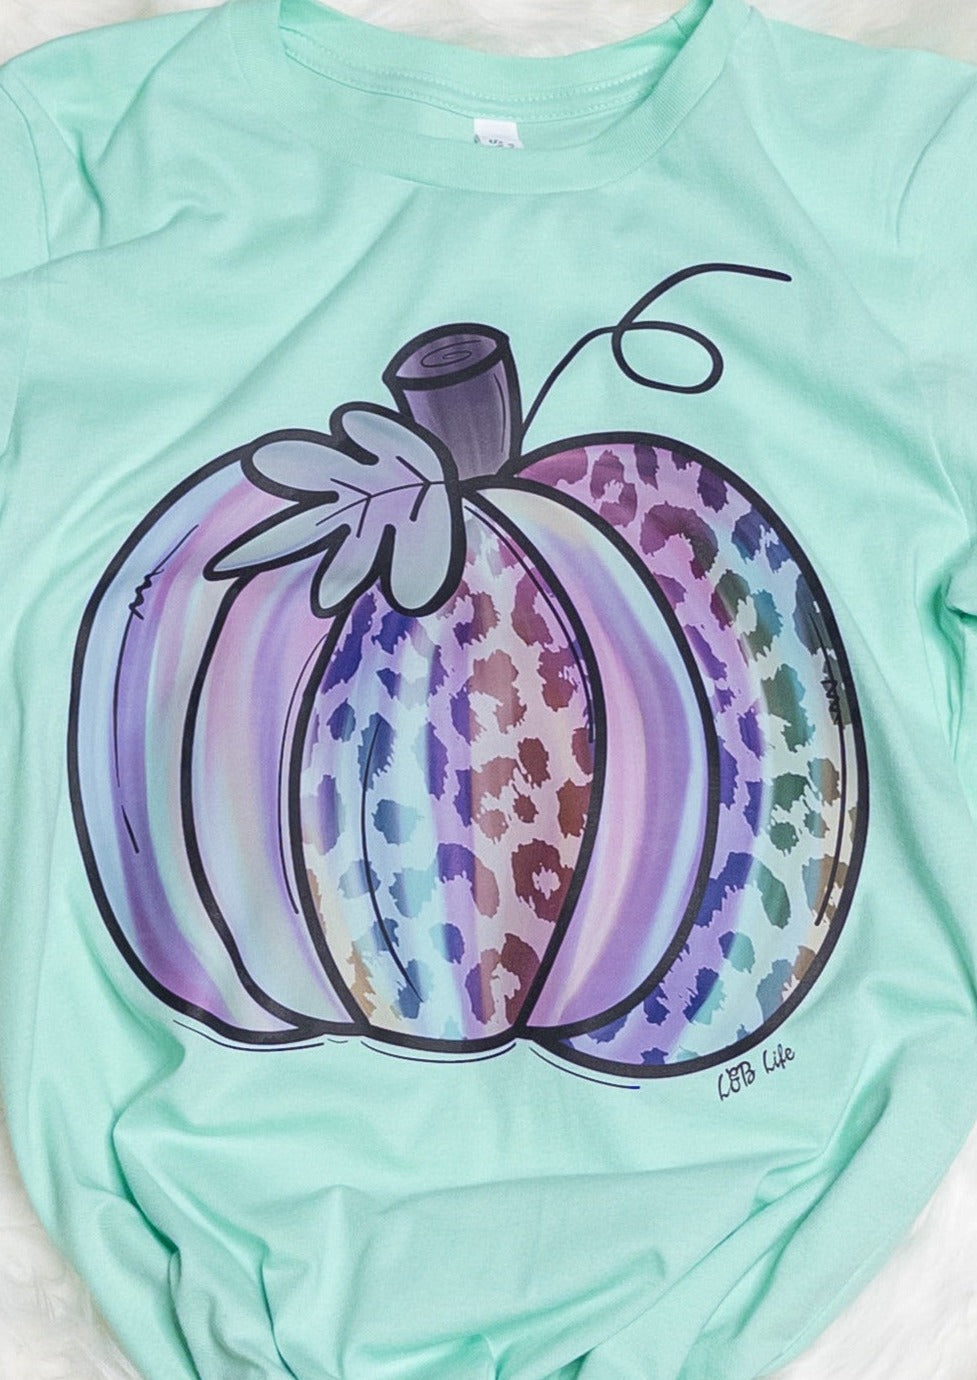 A mint colored tee shirt with a pumpkin. Pumpkin has some leopard print detailing and is light water color design with blues, purples, and pinks 